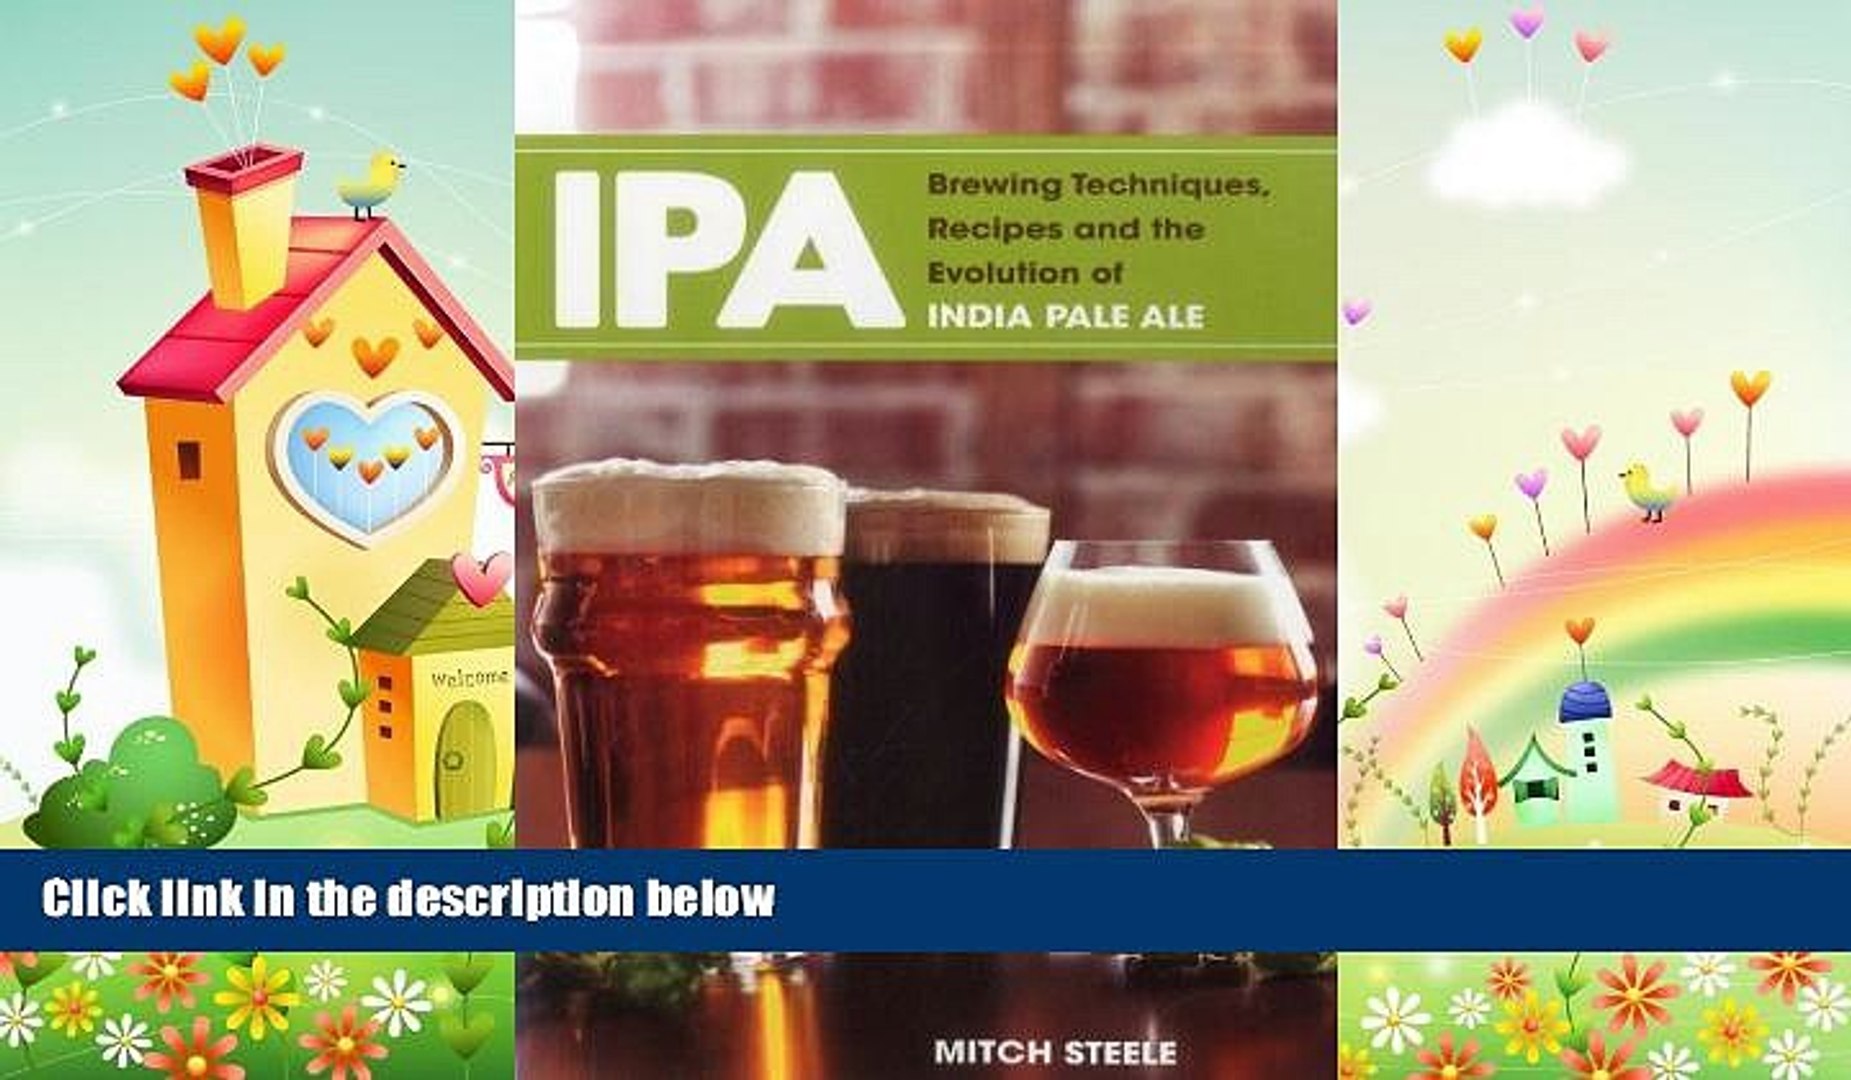 different   IPA: Brewing Techniques, Recipes and the Evolution of India Pale Ale by Mitch Steele